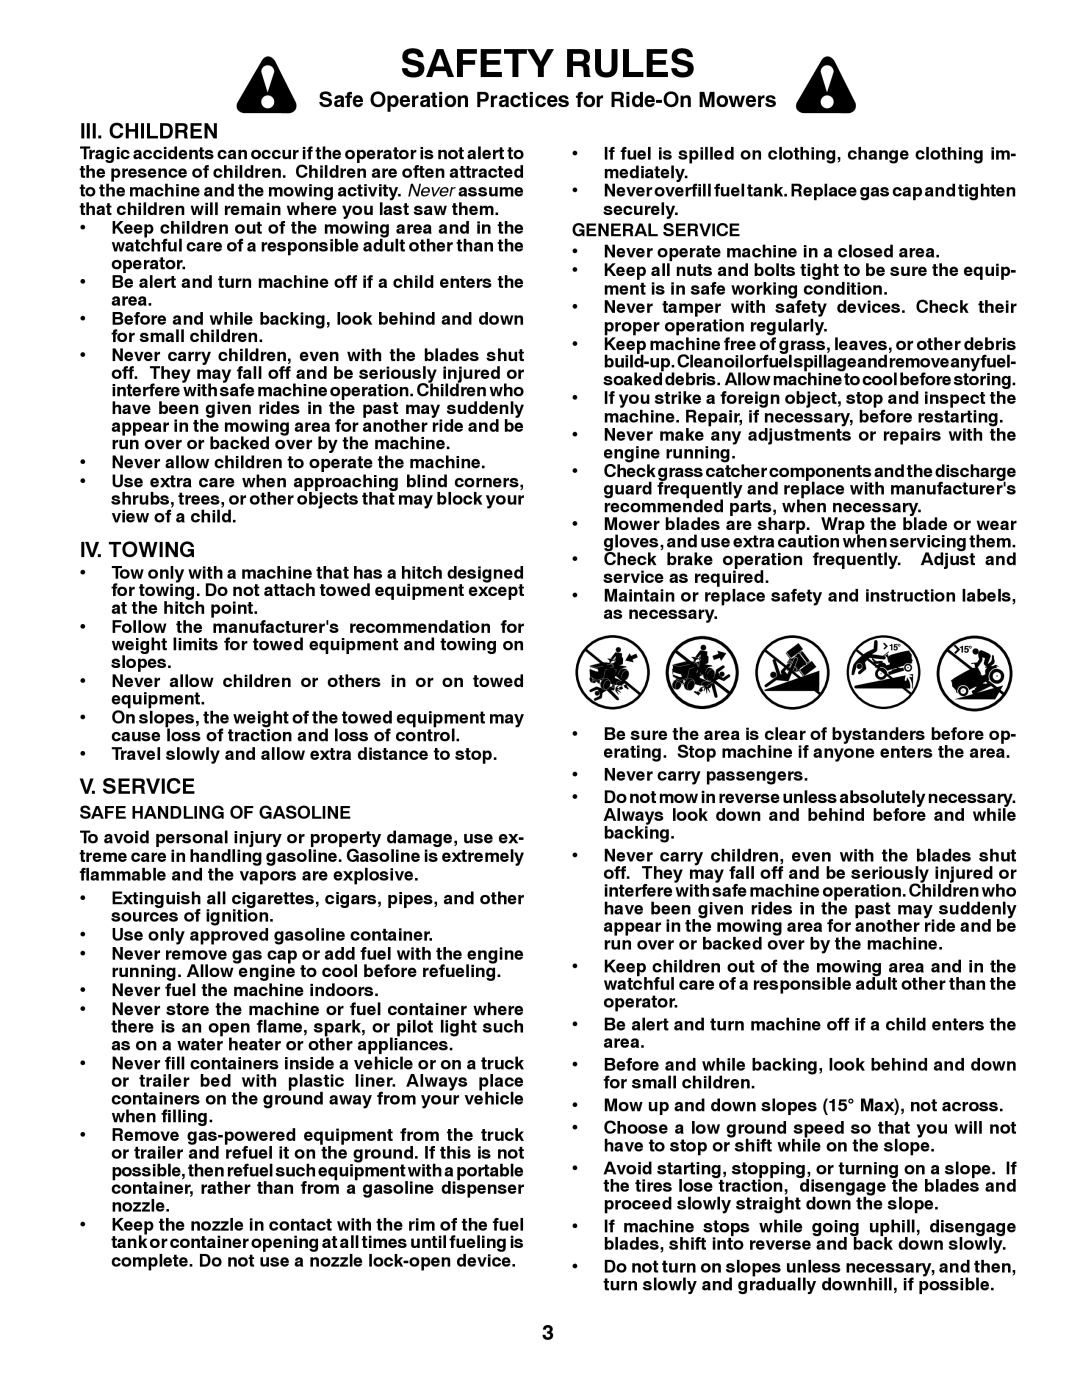 Poulan 424368 manual Iii. Children, Iv. Towing, V. Service, Safety Rules, Safe Operation Practices for Ride-On Mowers 